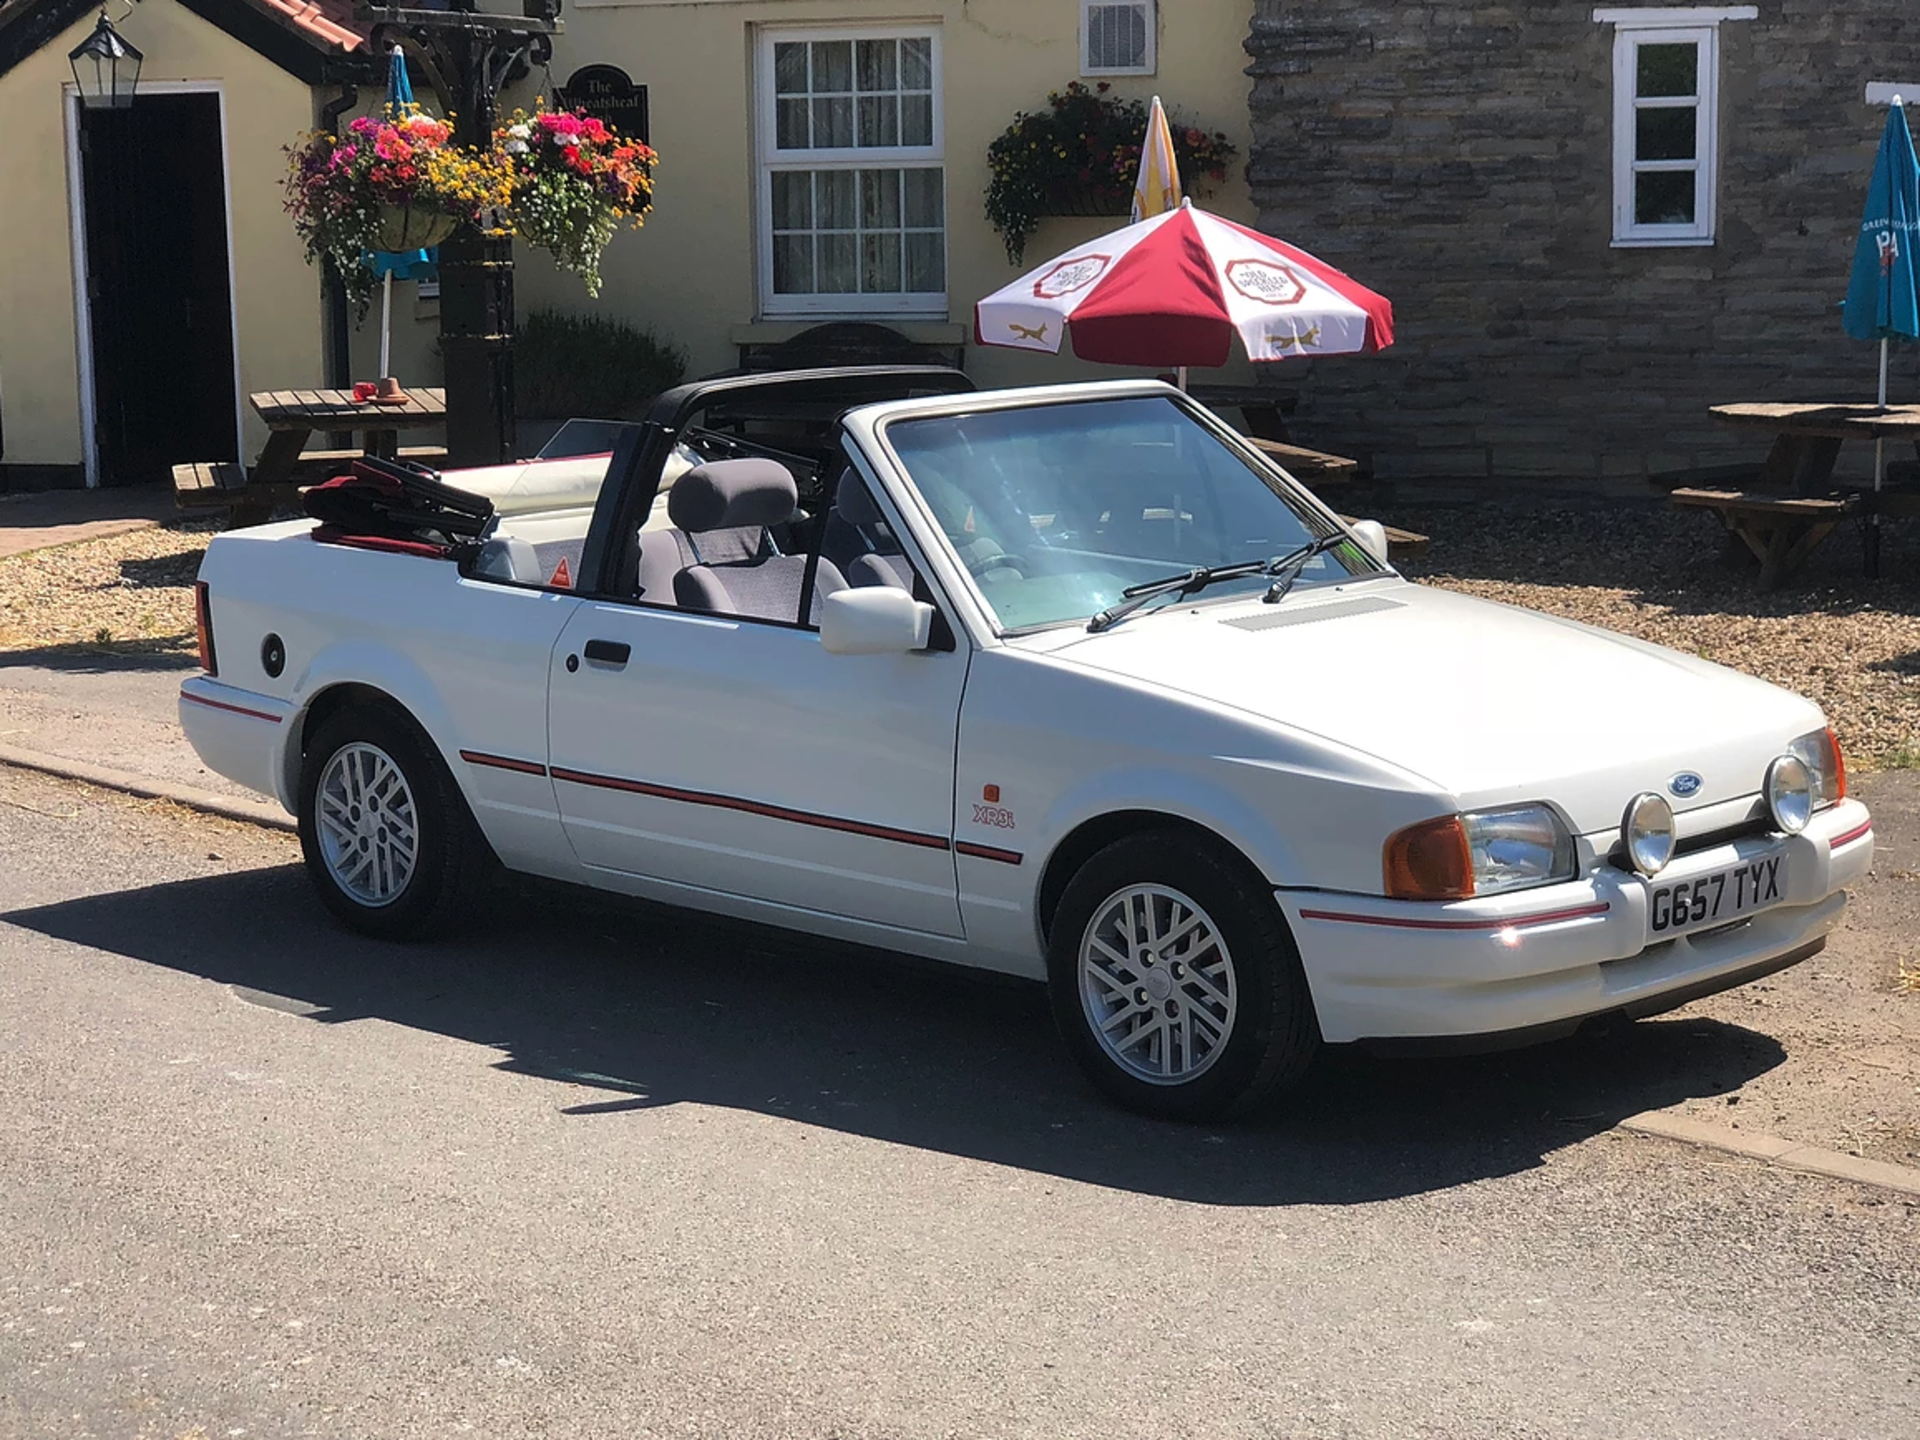 1989 Ford Escort XR3i Convertible - Image 4 of 13